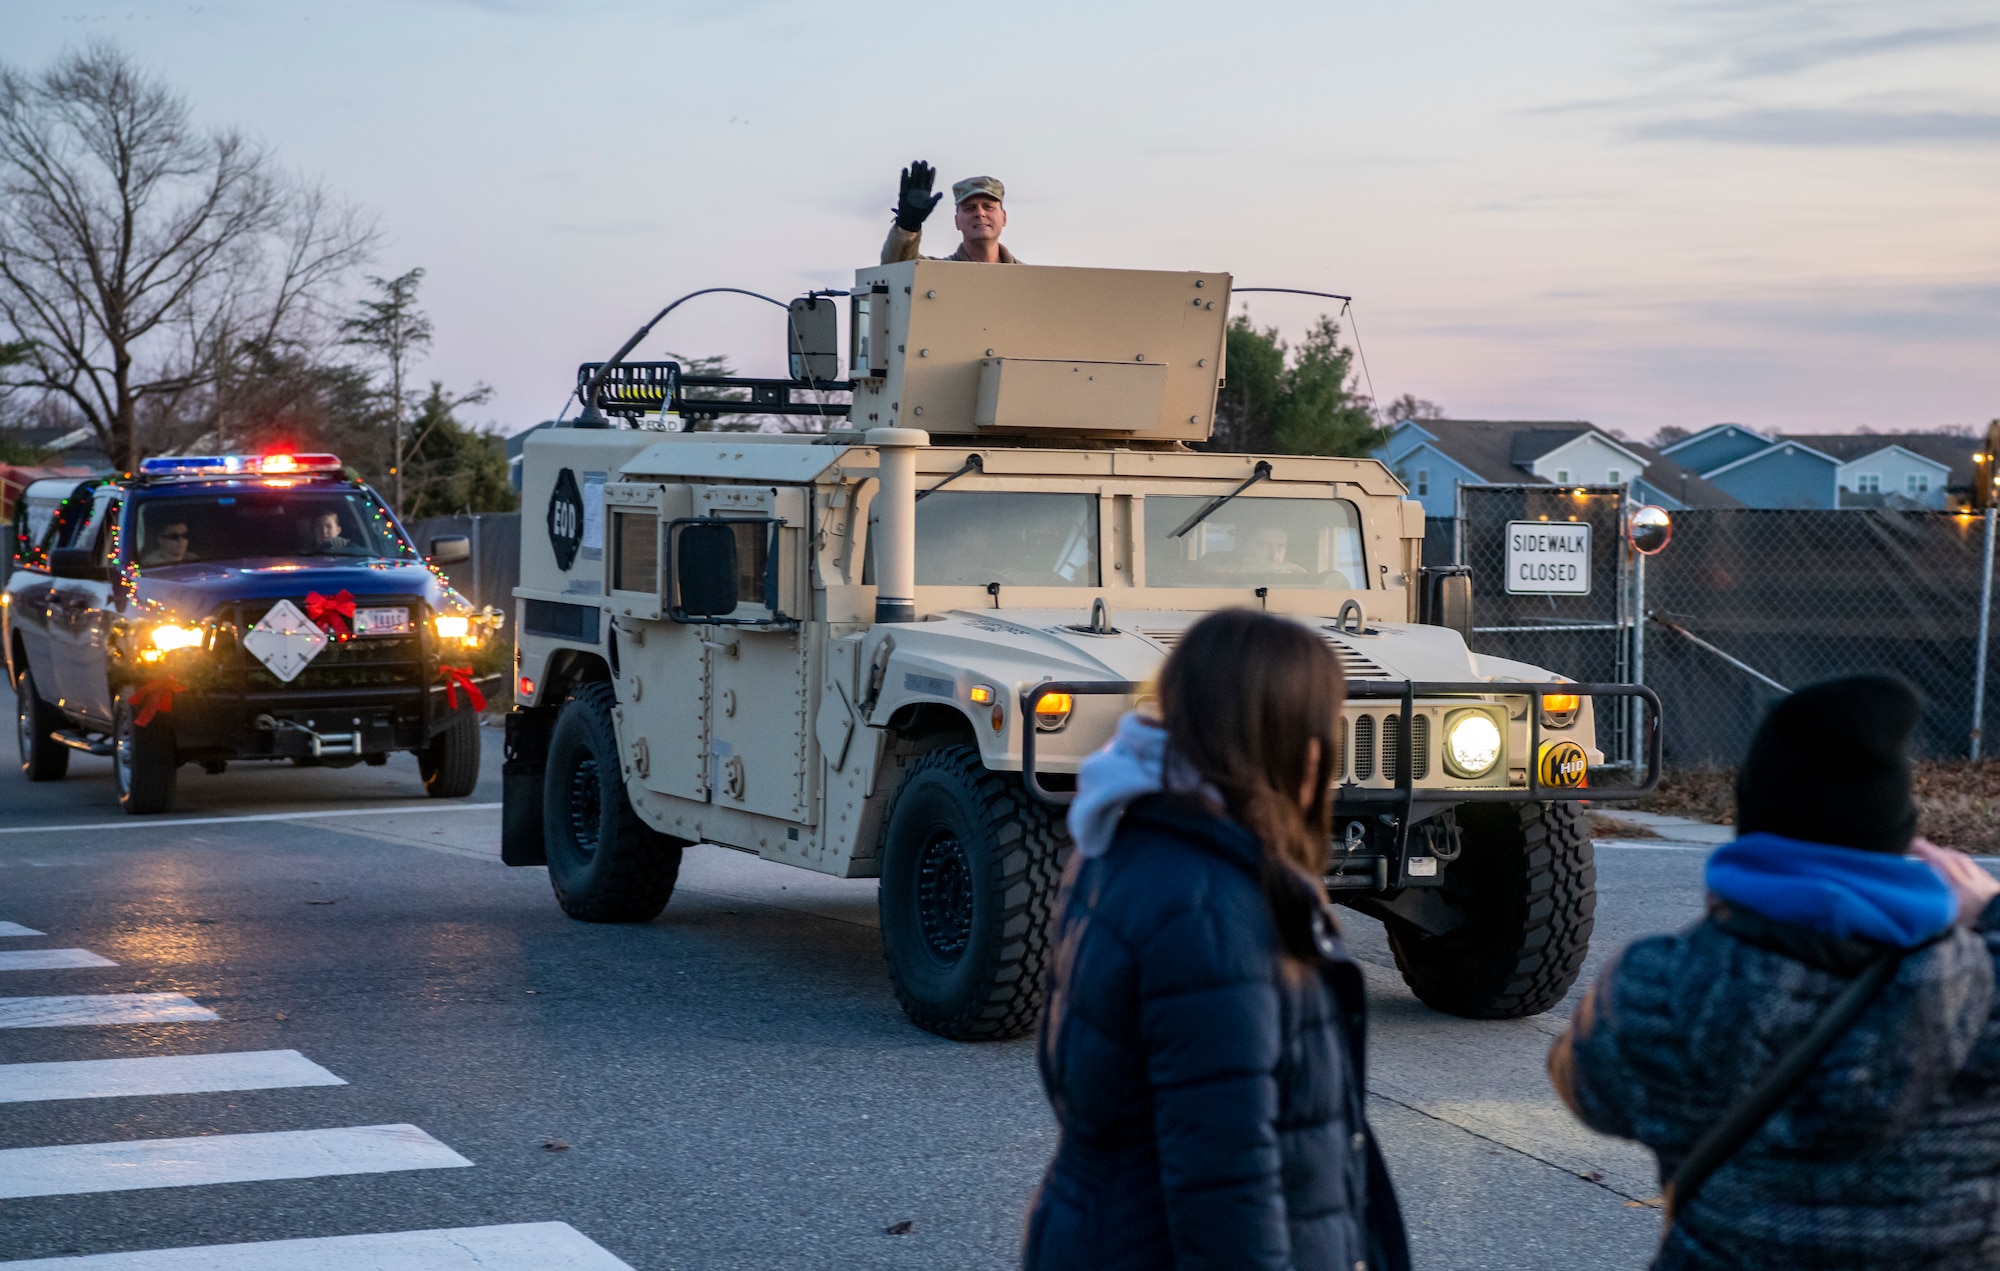 Col. Joel Safranek, 436th Airlift Wing commander, waves during the 2019 Dover Air Force Base Holiday Parade Dec. 3, 2019, at Dover Air Force Base, Del. A variety of military and first responder vehicles were decorated for the event. (U.S. Air Force photo by Senior Airman Christopher Quail)